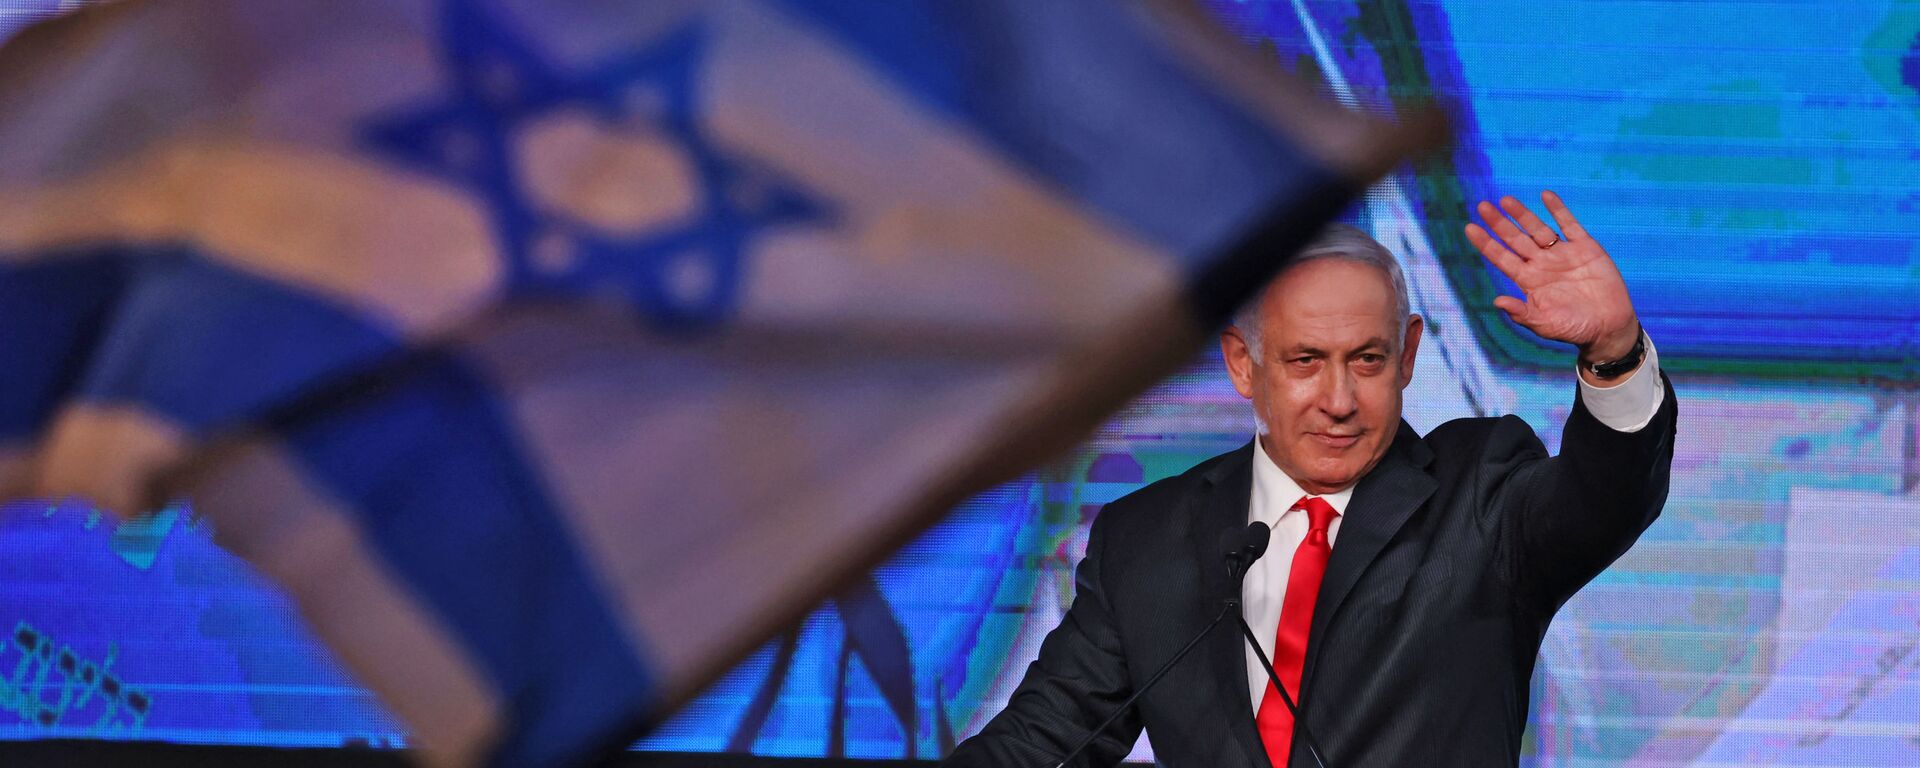 In this file photo taken on March 24, 2021, Israeli Prime Minister Benjamin Netanyahu, leader of the Likud party, addresses supporters at the party campaign headquarters in Jerusalem after the end of voting in the fourth national election in two years. - Sputnik International, 1920, 10.07.2021